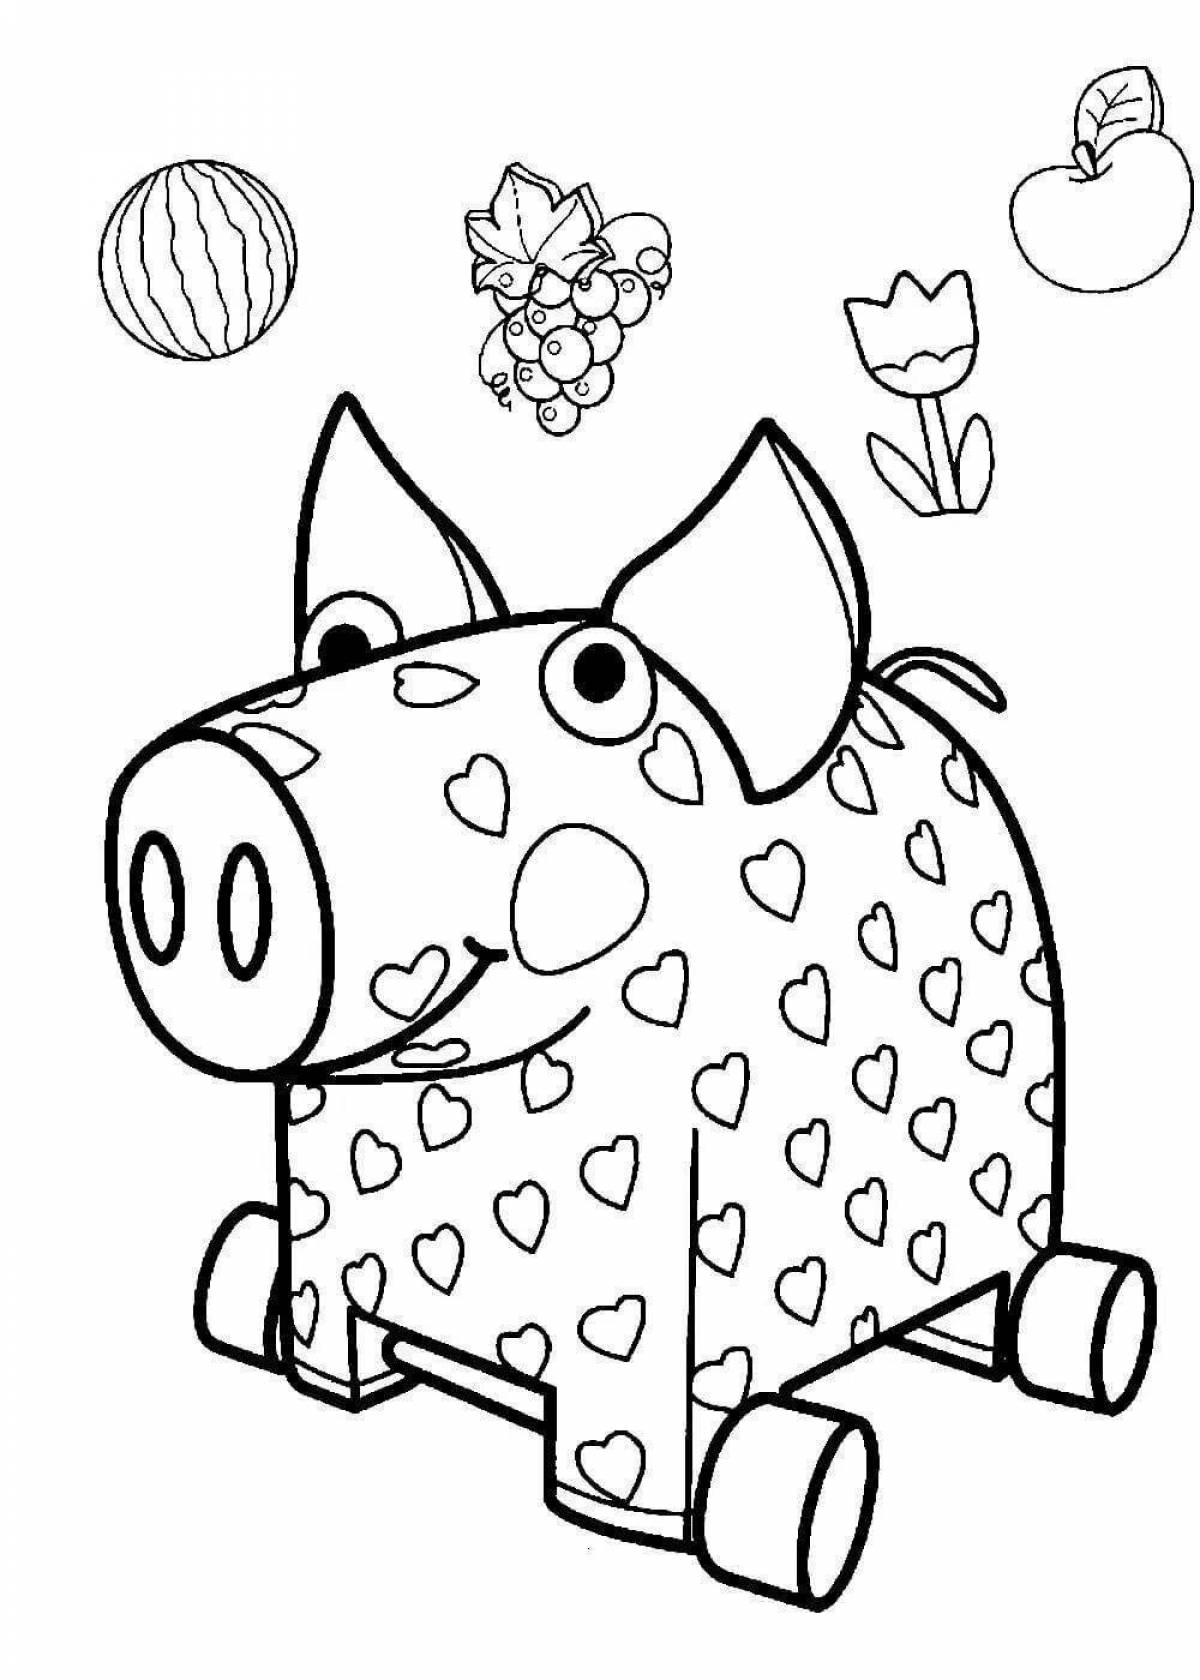 Coloring page dazzling wooden dog